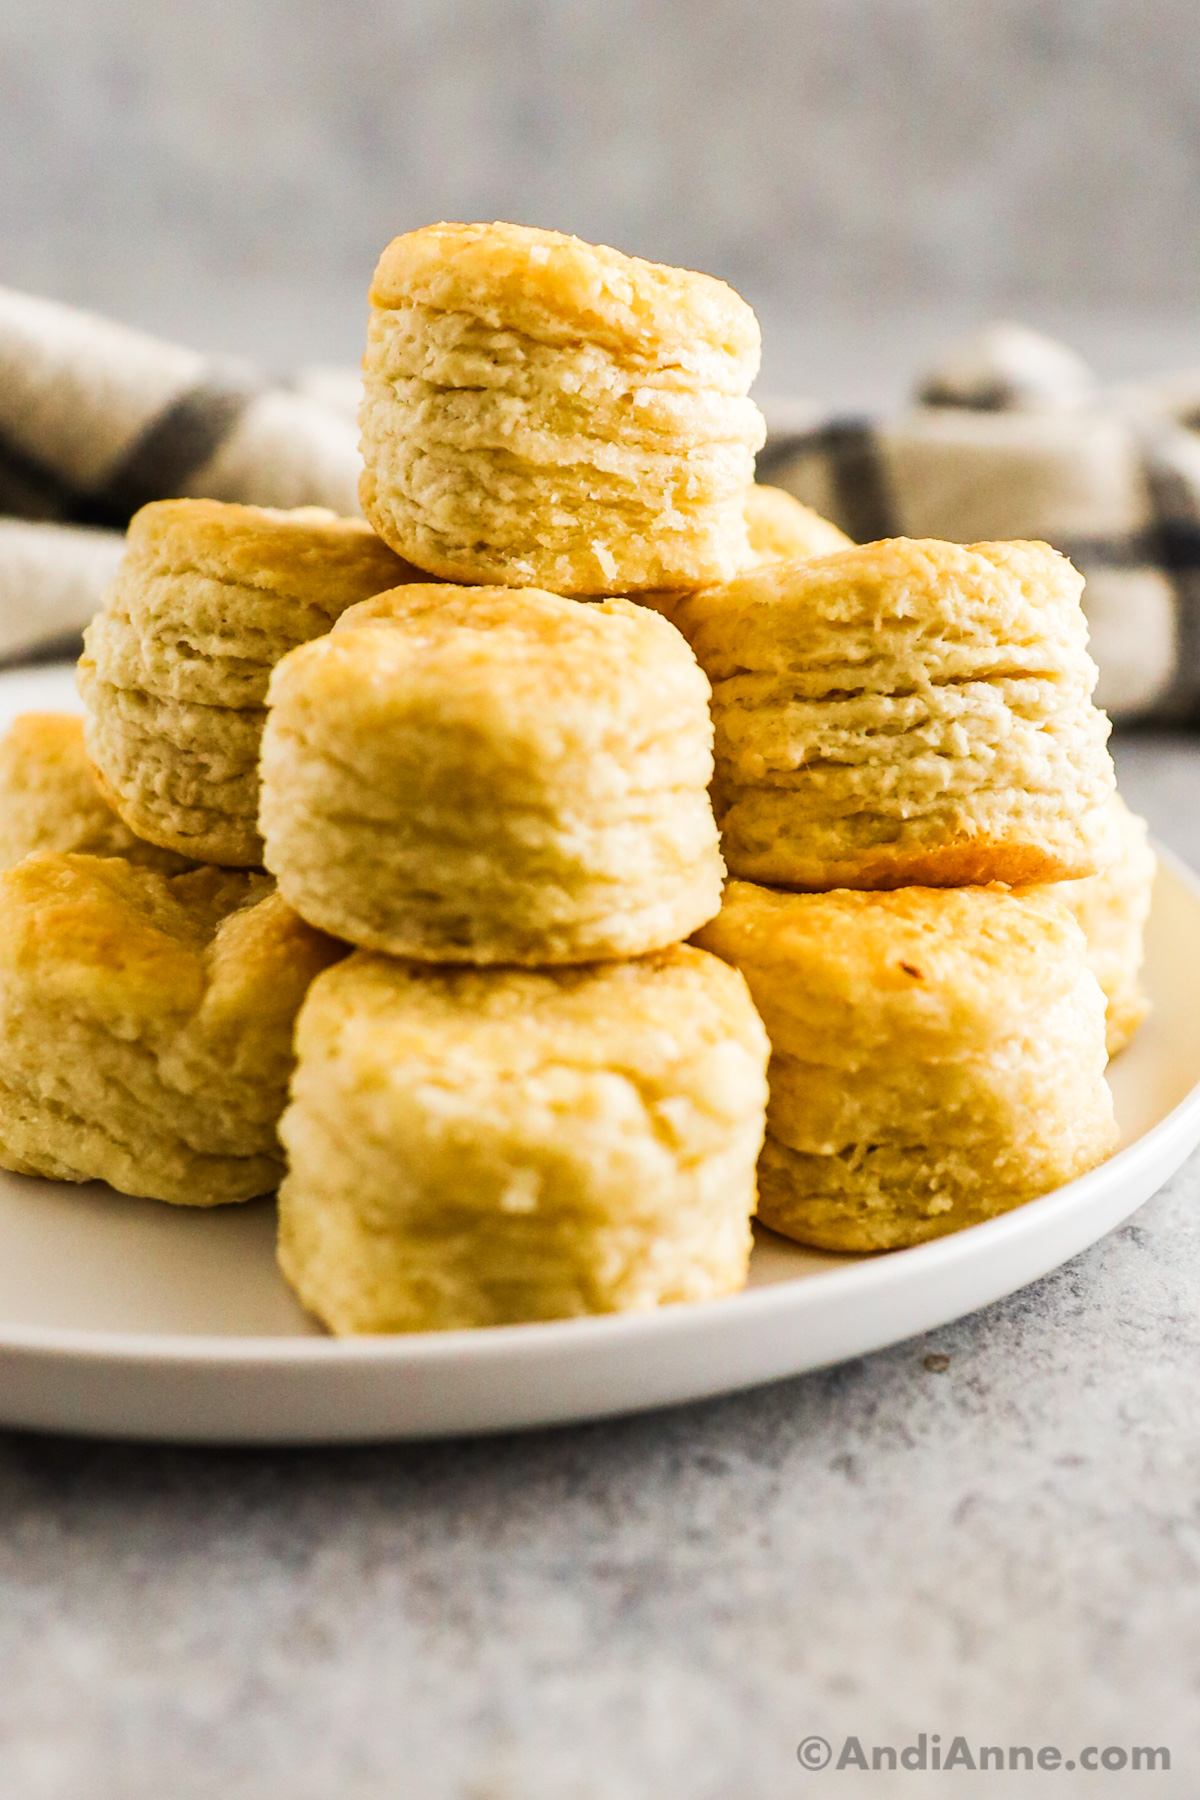 A stack of baking powder biscuits on a white plate.